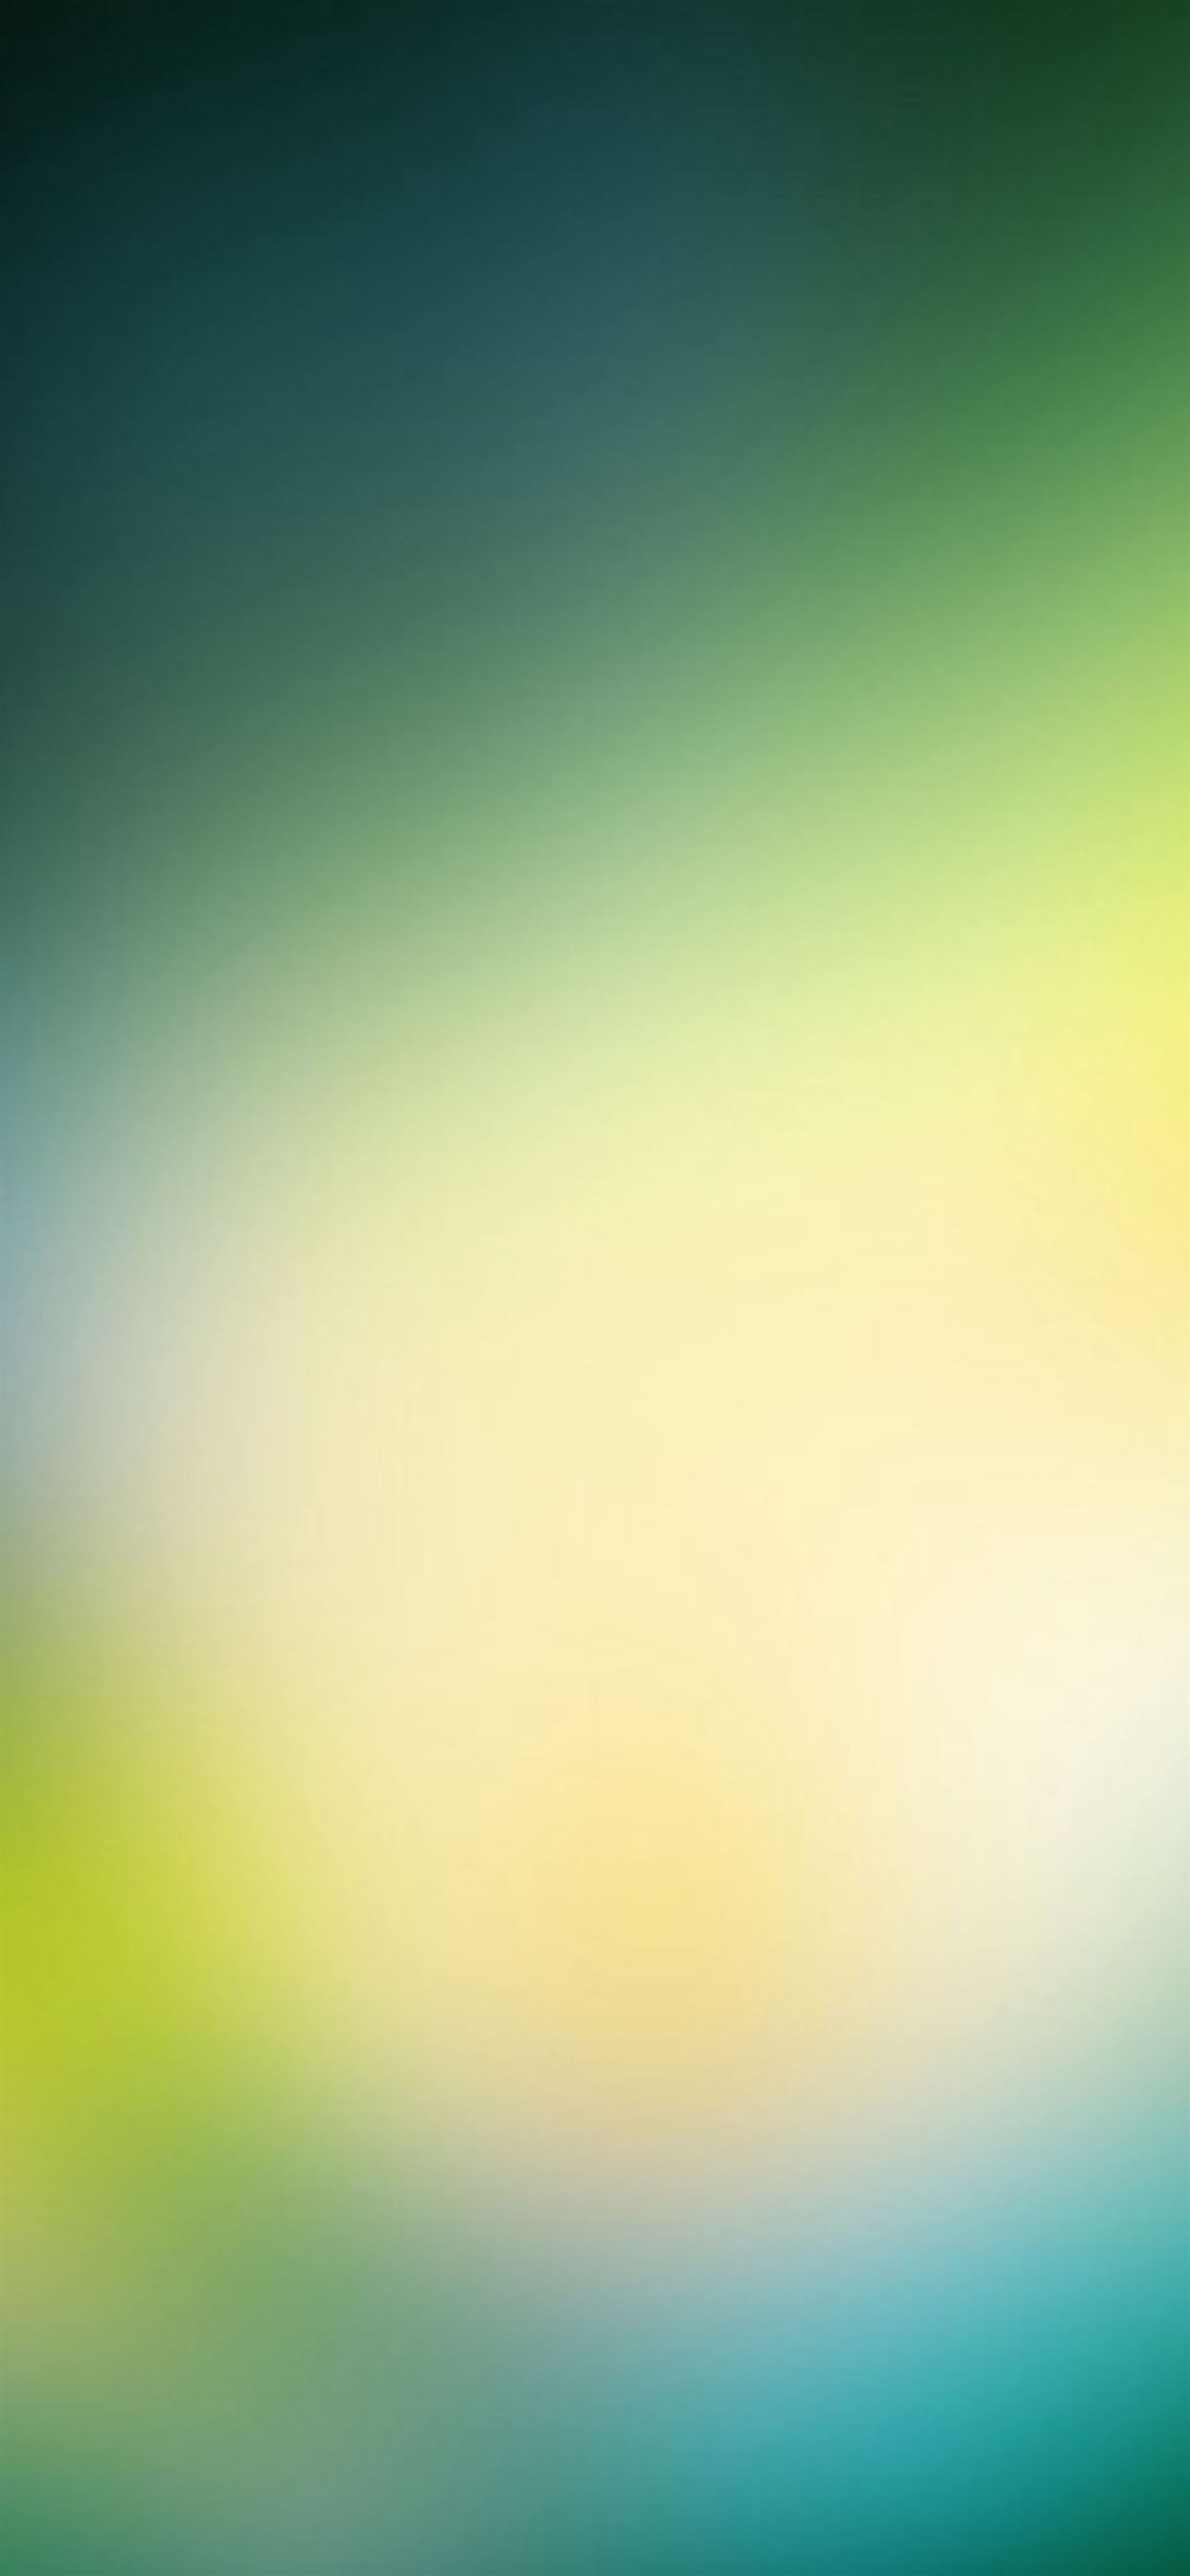 Green Os Background Gradation Blur iPhone Wallpapers Free Download